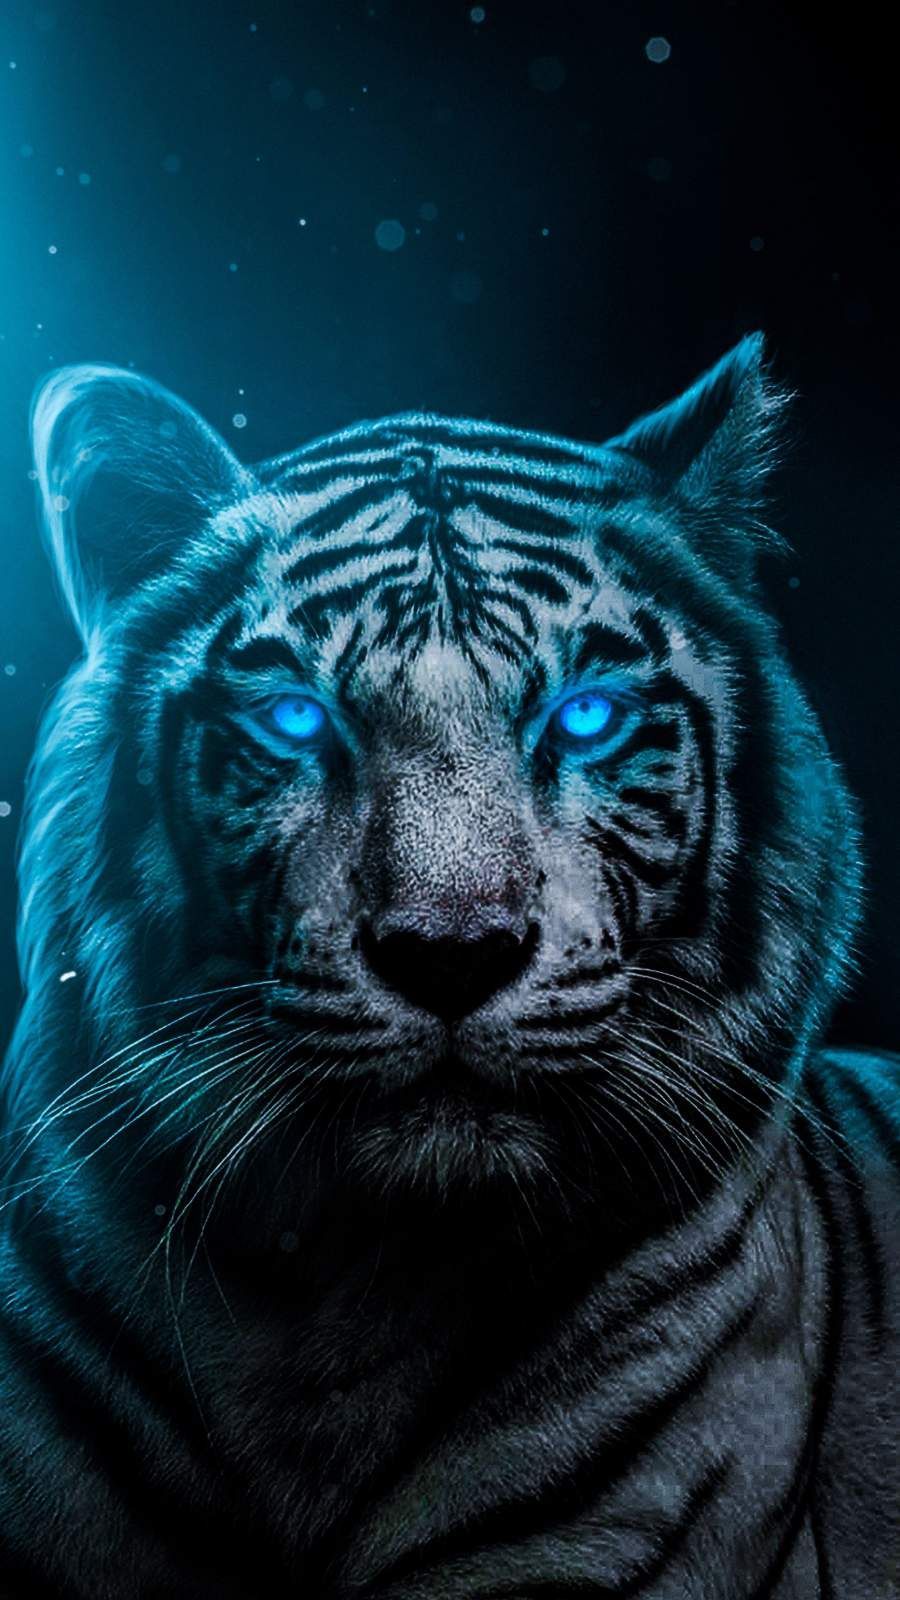 Red Tiger Wallpapers